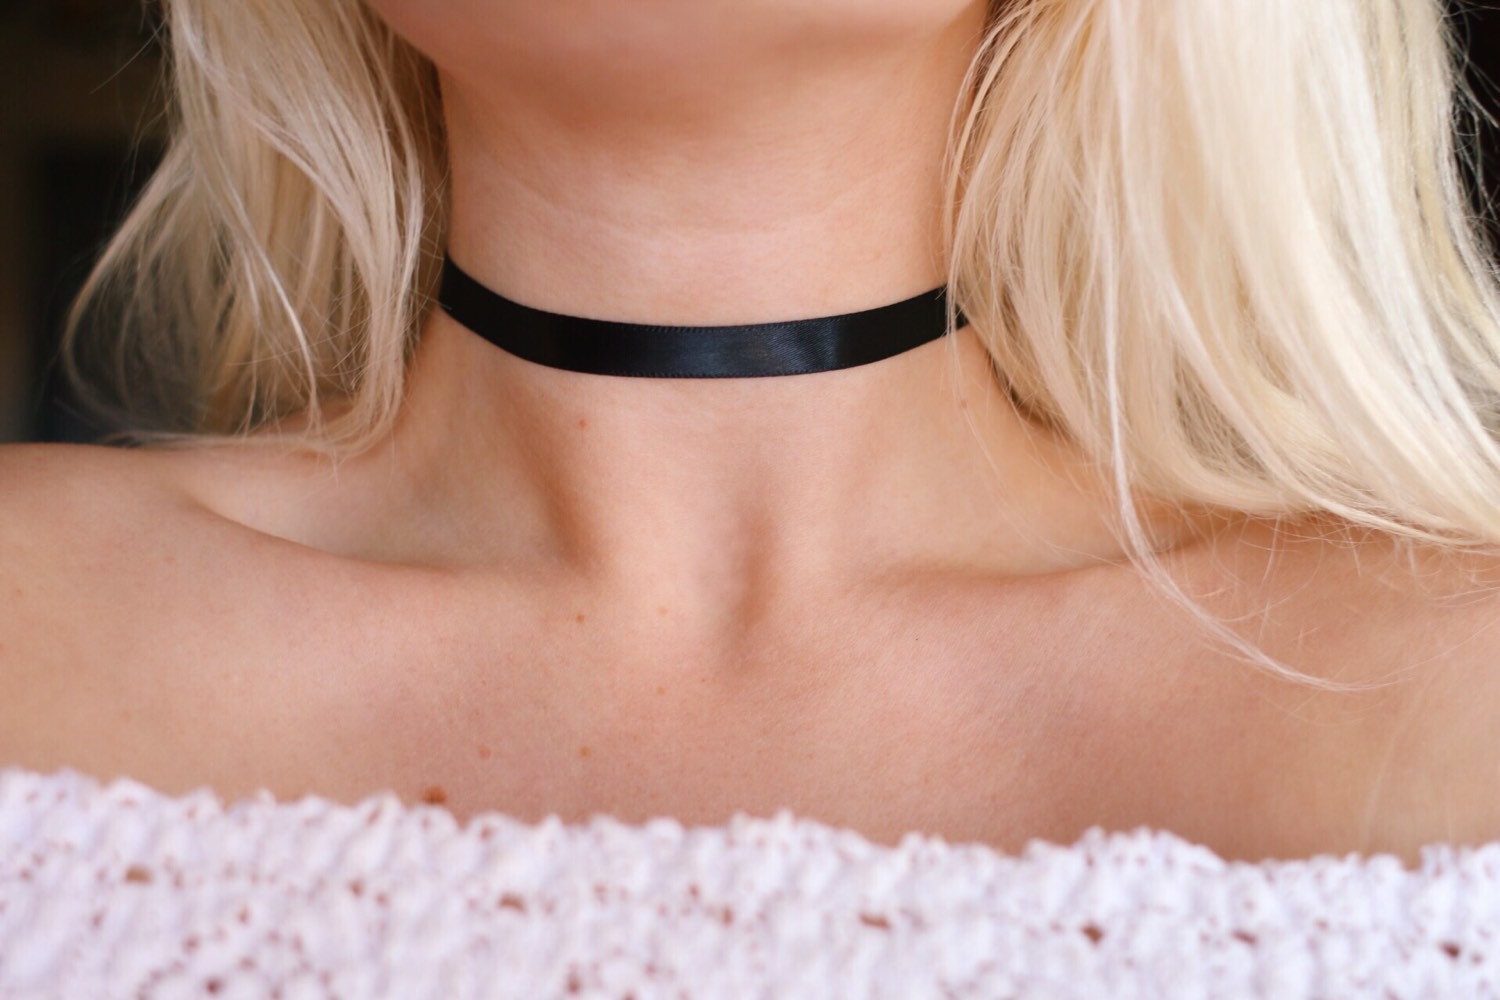 Hesroicy Ribbon Choker Adjustable Lobster Clasp Design with Extension Chain  Solid Color Easy-wearing Women Elegant Ultra Long Ribbon Choker Necklace